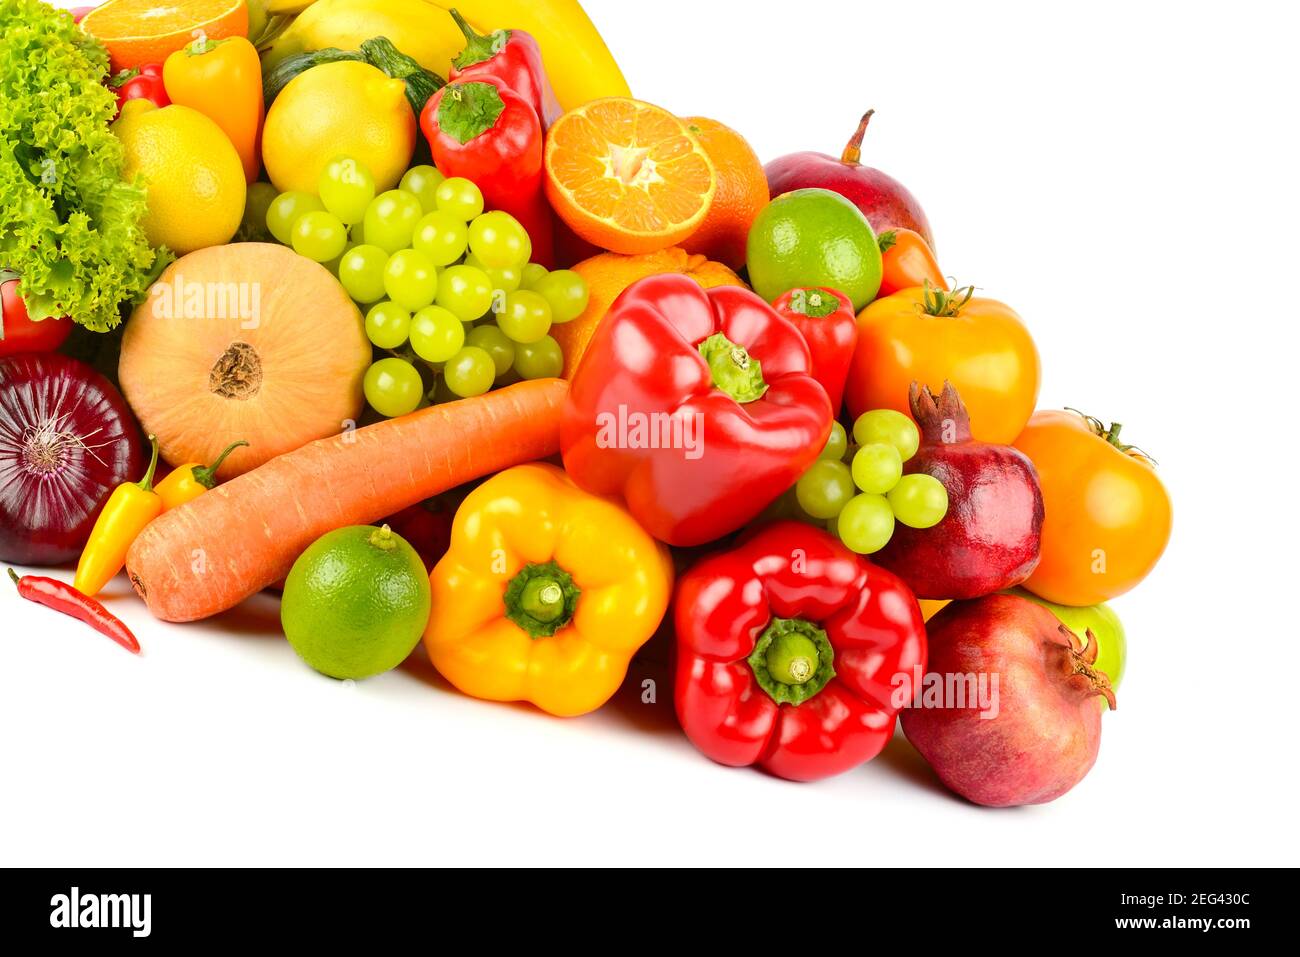 Big collection delicious fruits and vegetables isolated on white background. Stock Photo